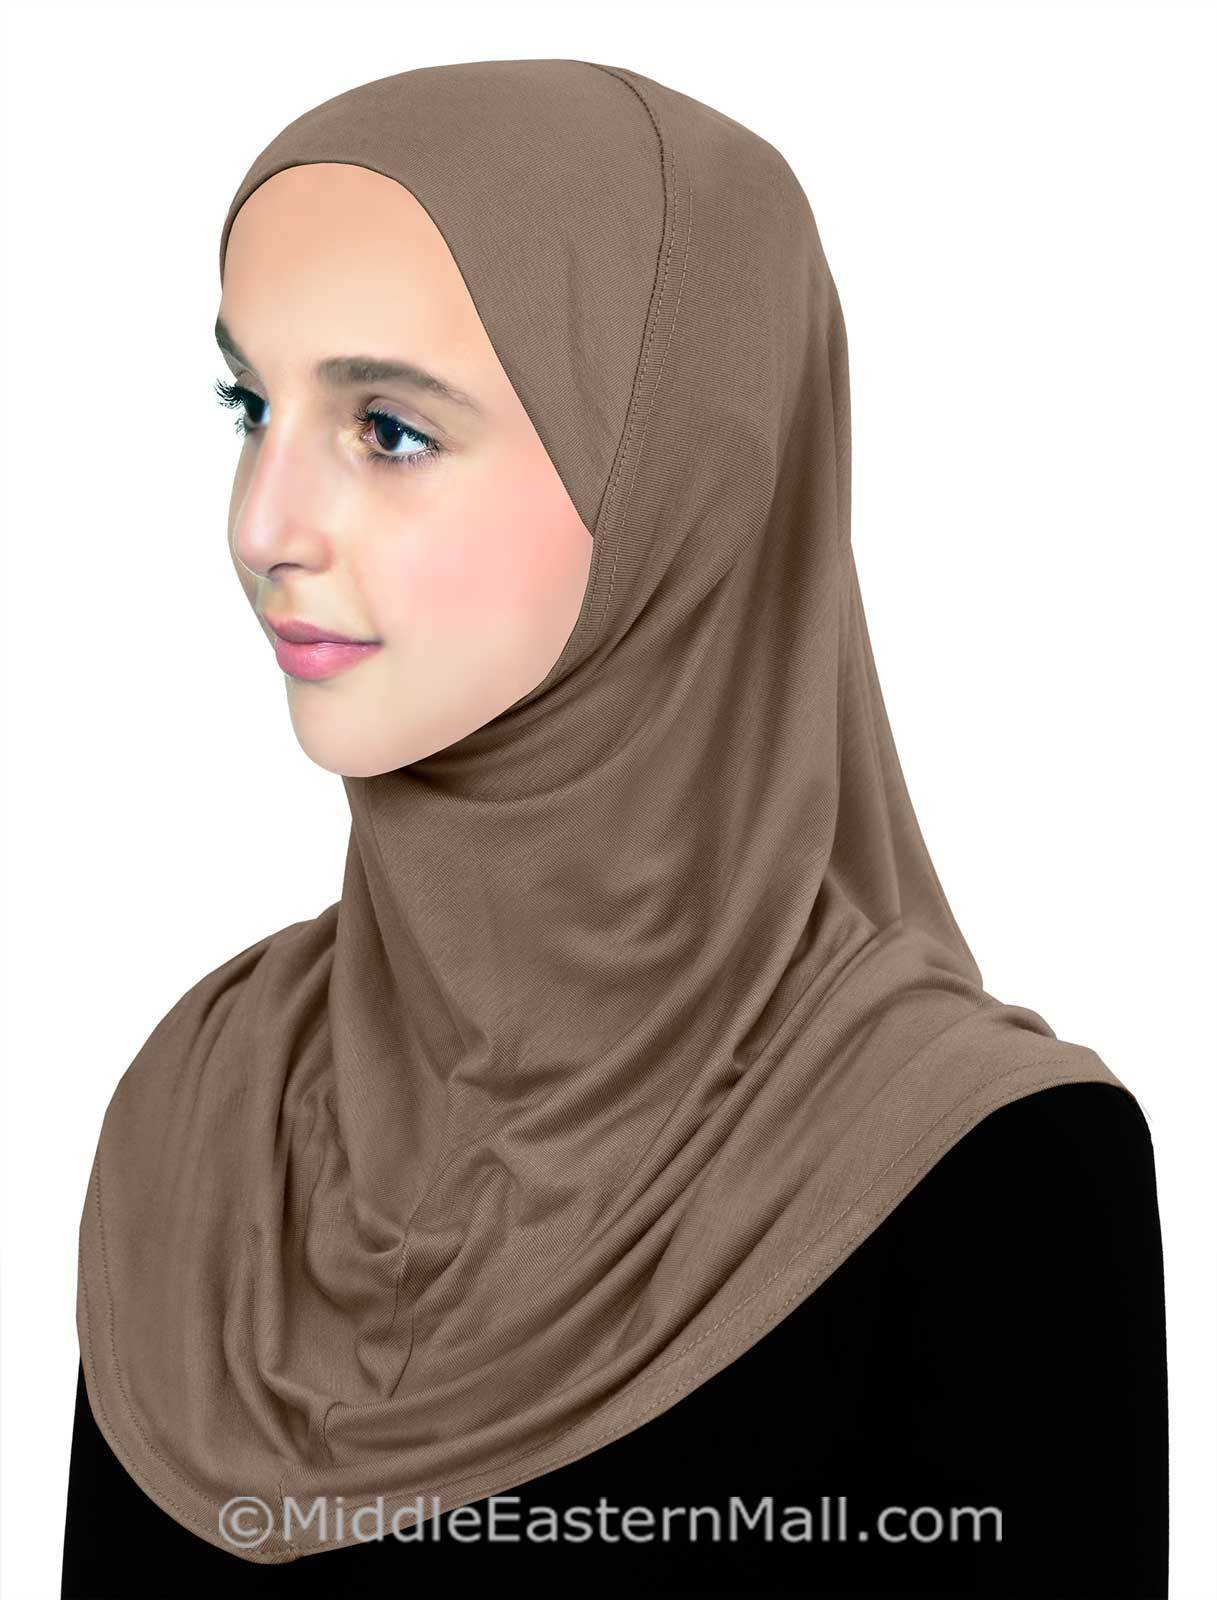 Wholesale Pre-Teen Girl's Cotton Hijab 1 piece Hijabs in 4 Colors No Navy